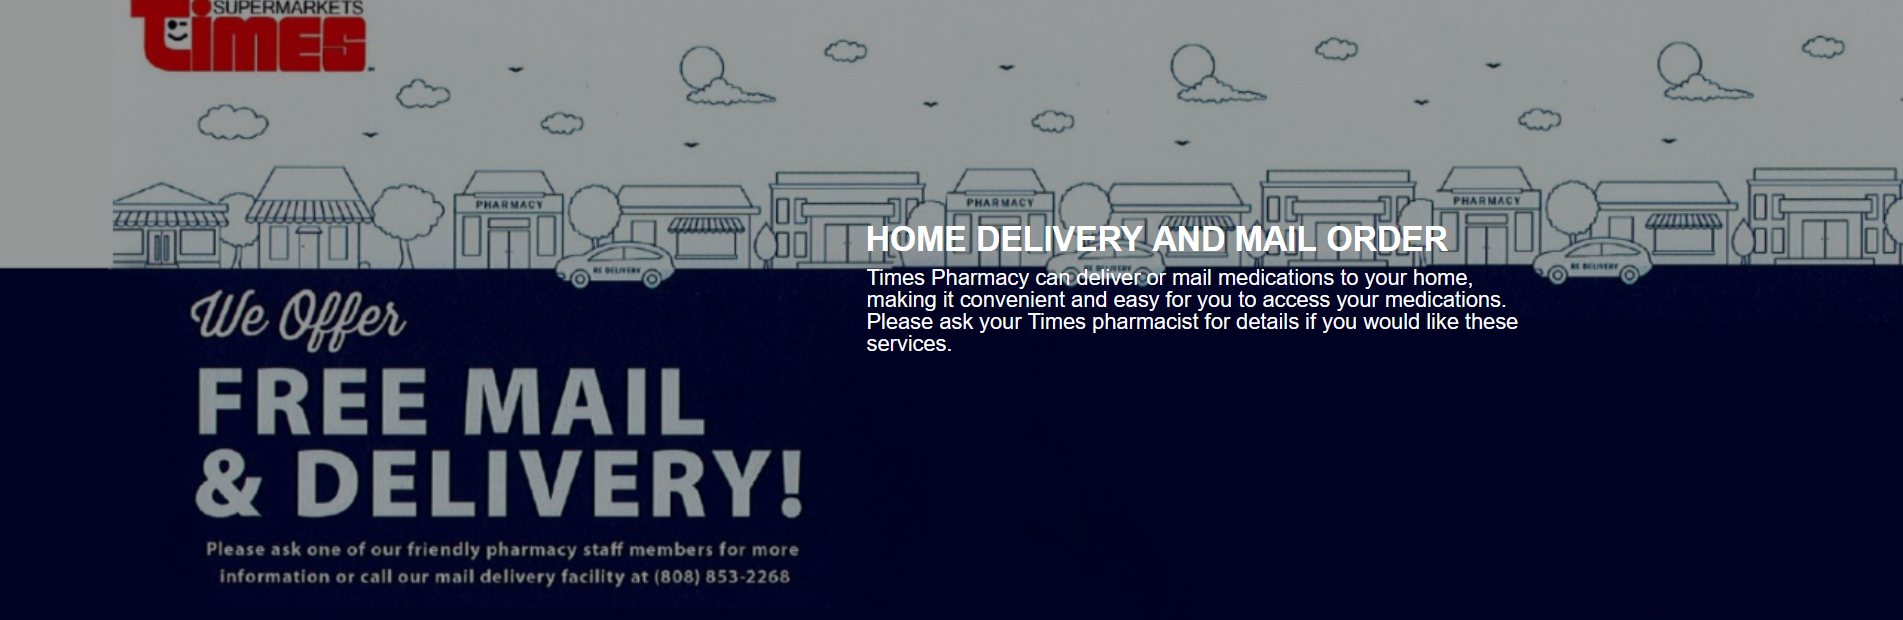 Home Delivery and Mail Order